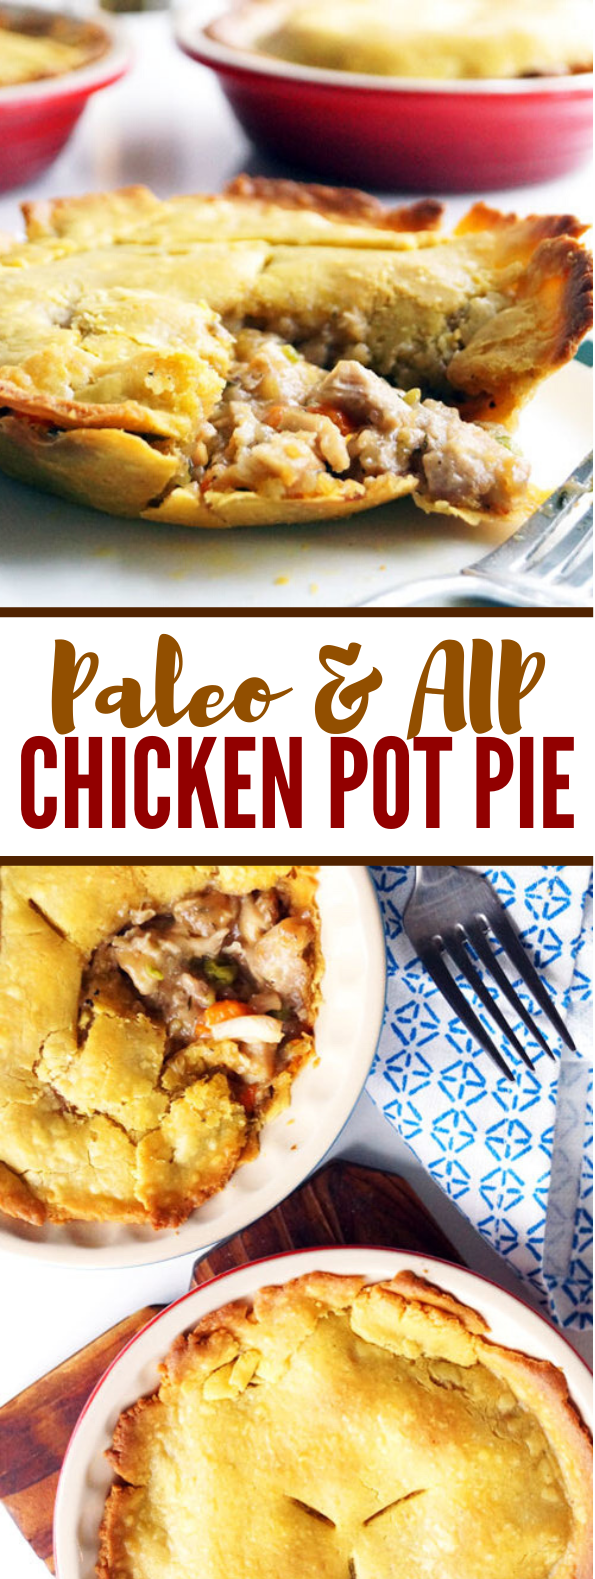 PERFECT PALEO AND AIP CHICKEN POT PIE #healthy #diet